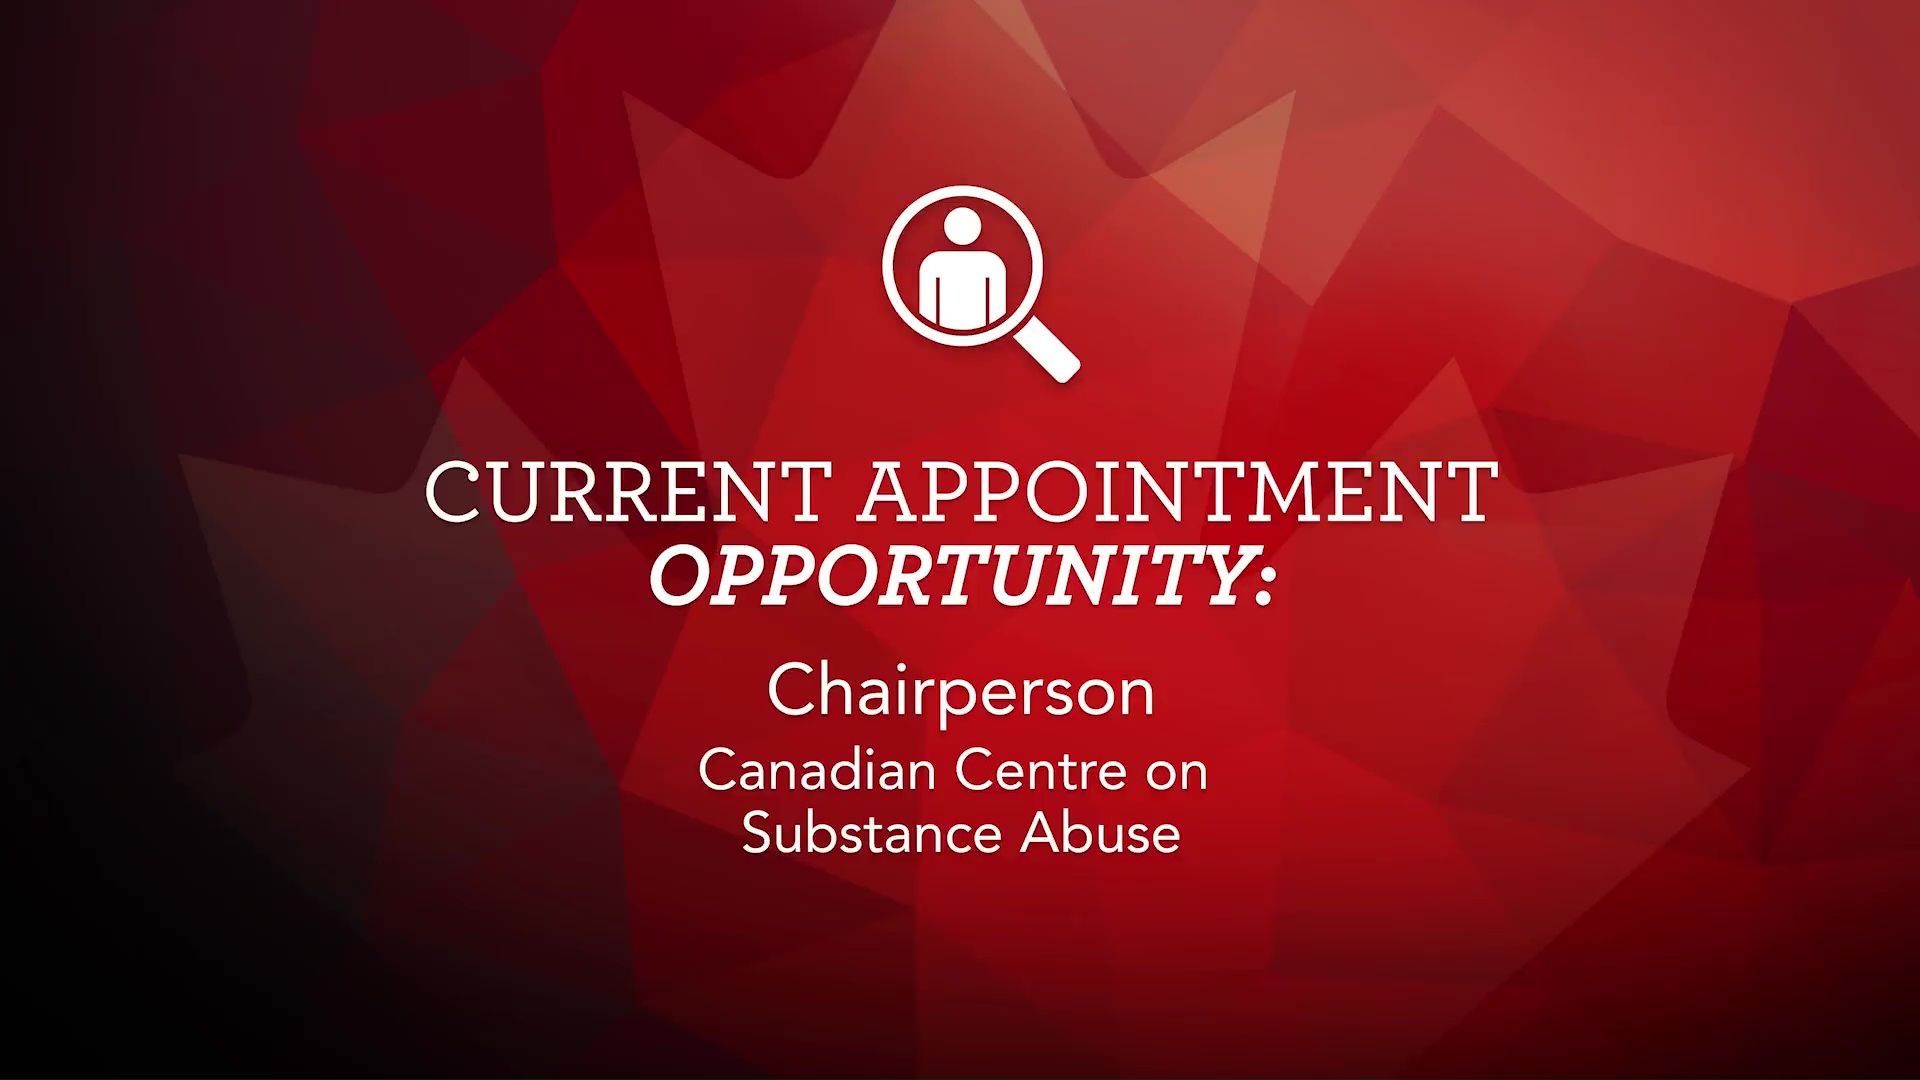 Opportunity: Canadian Centre on Substance Abuse, Chairperson